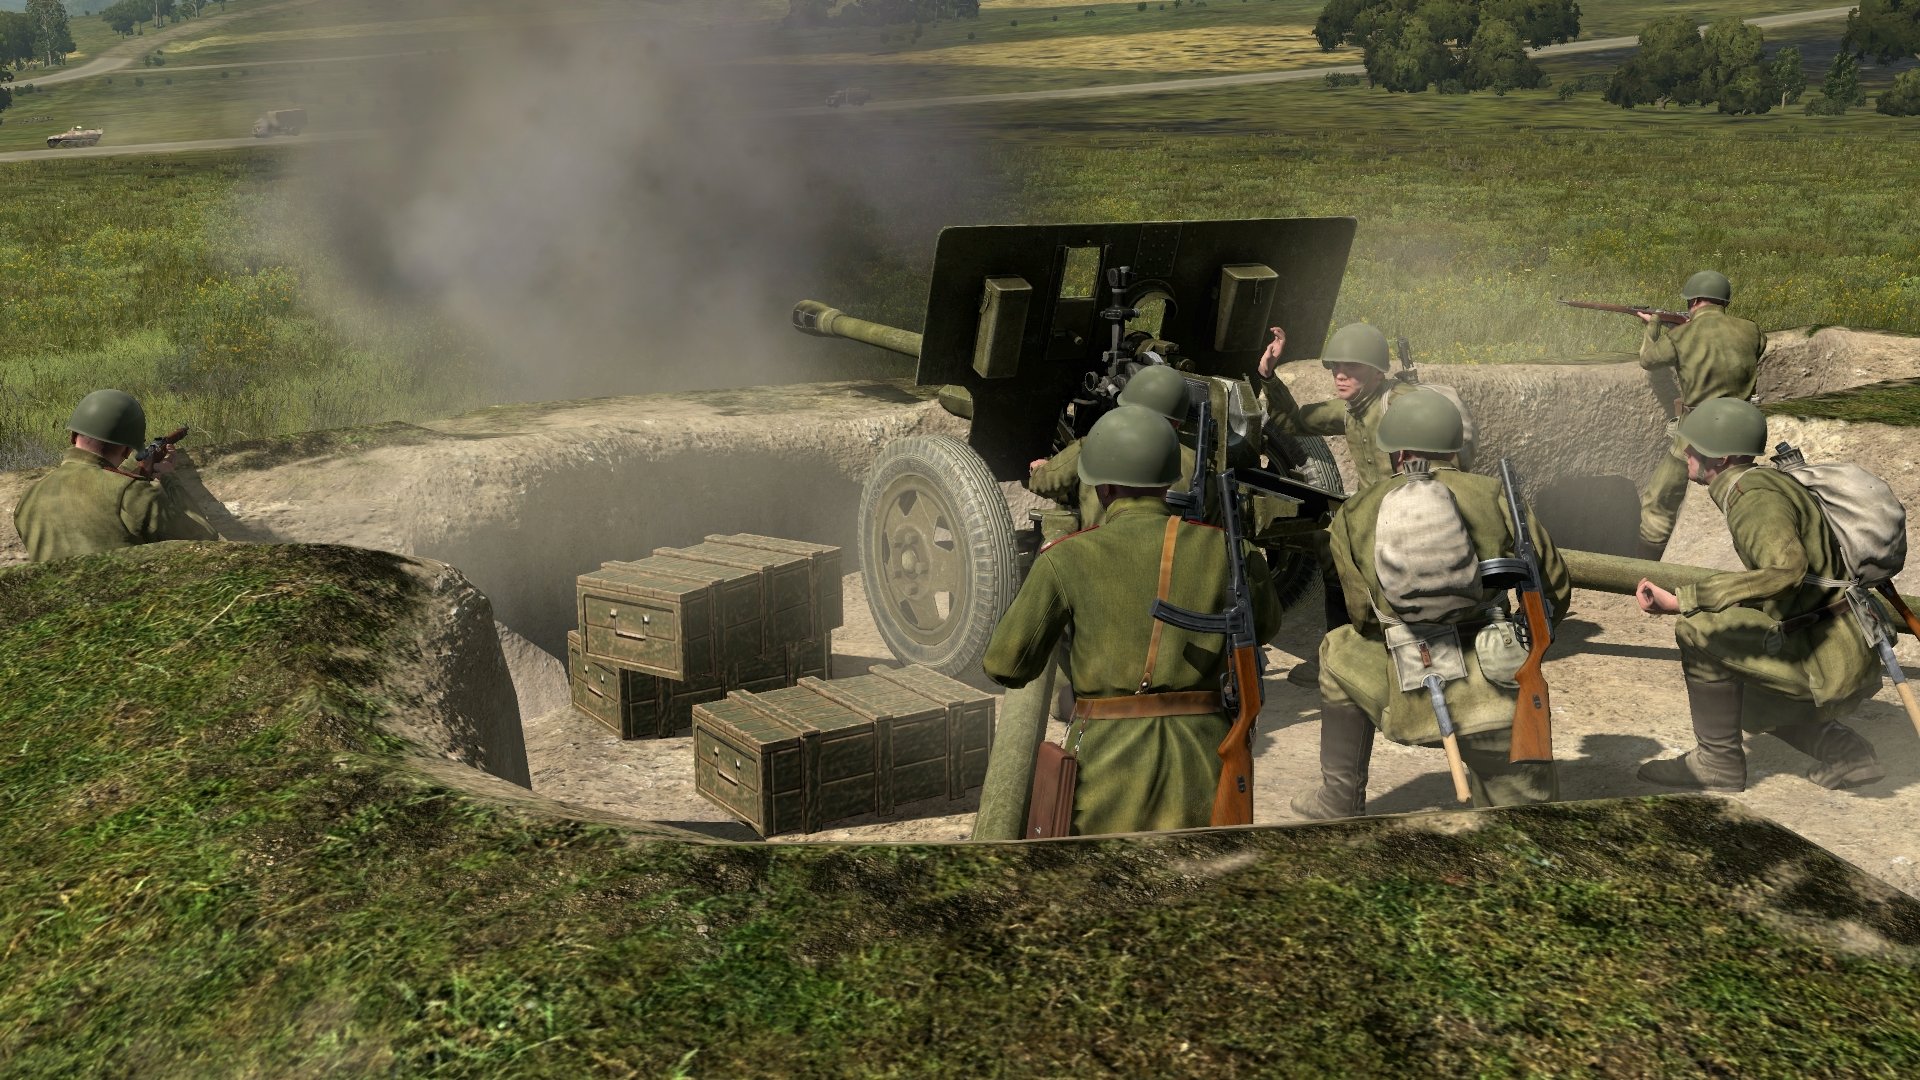 Iron Front Liberation 1944 Backgrounds, Compatible - PC, Mobile, Gadgets| 1920x1080 px